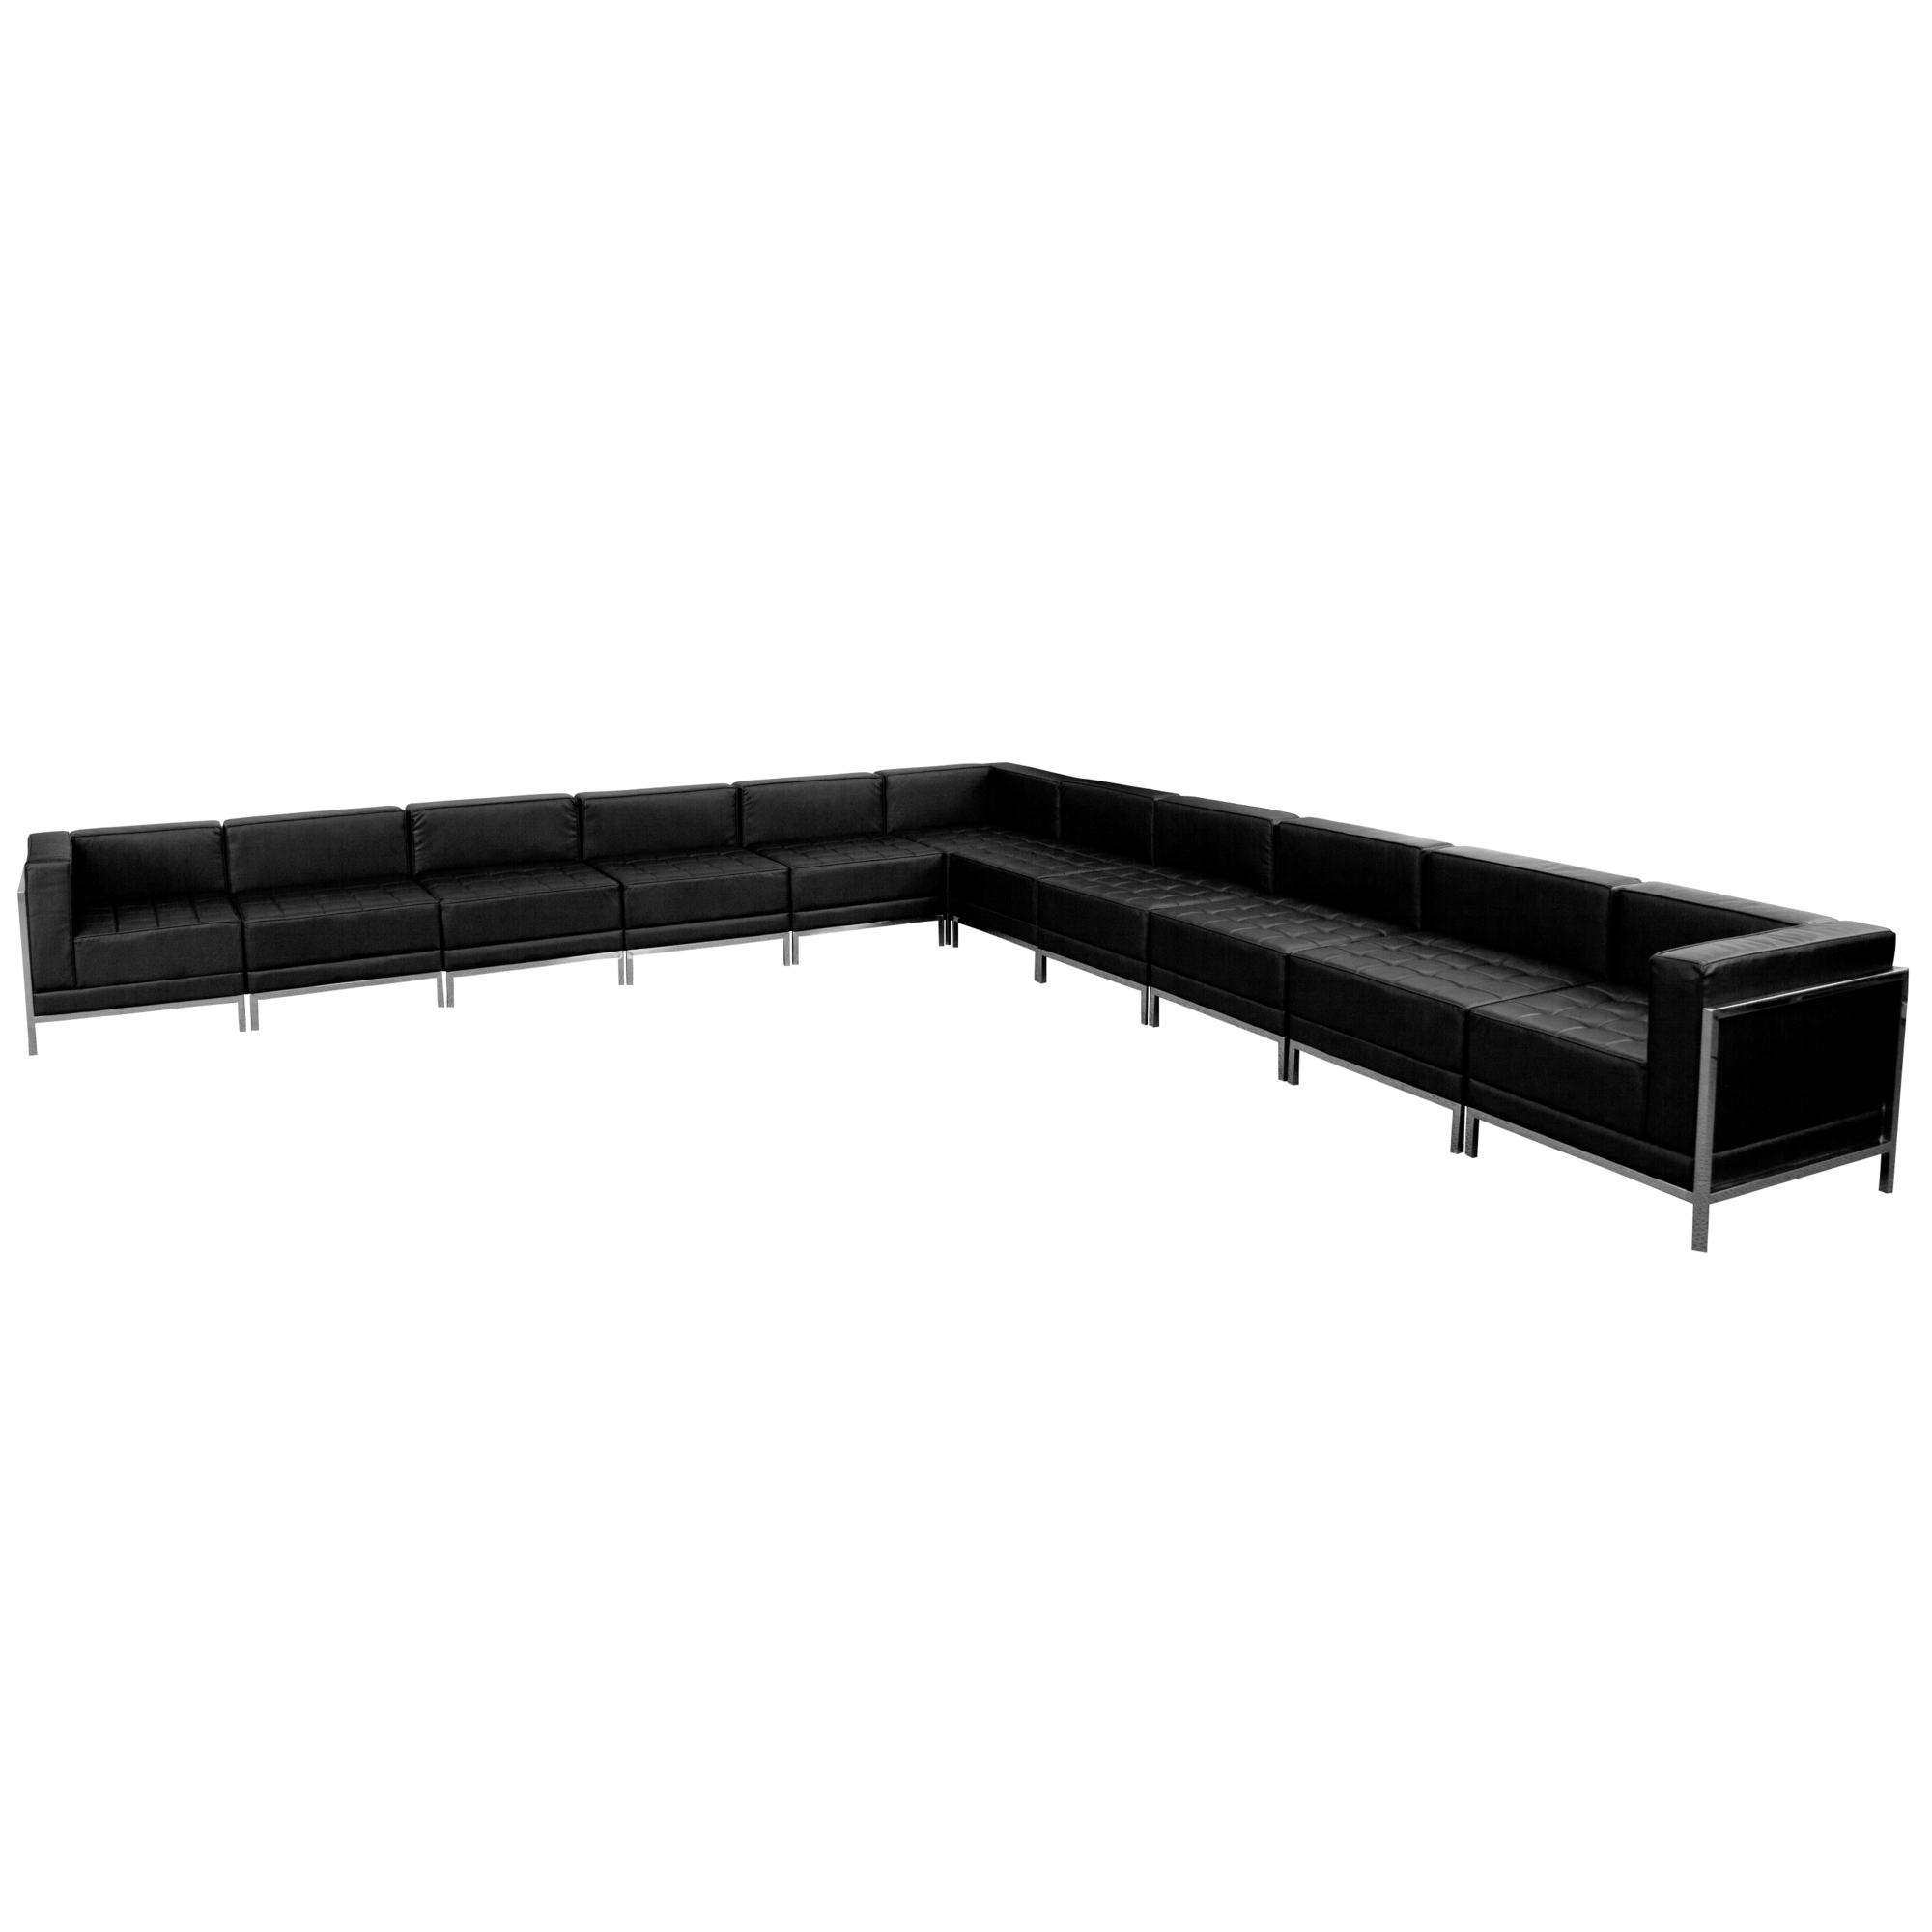 Flash Furniture, 11 PC Black LeatherSoft Sectional Configuration, Primary Color Black, Included (qty.) 11, Model ZBIMAGSECTSET2